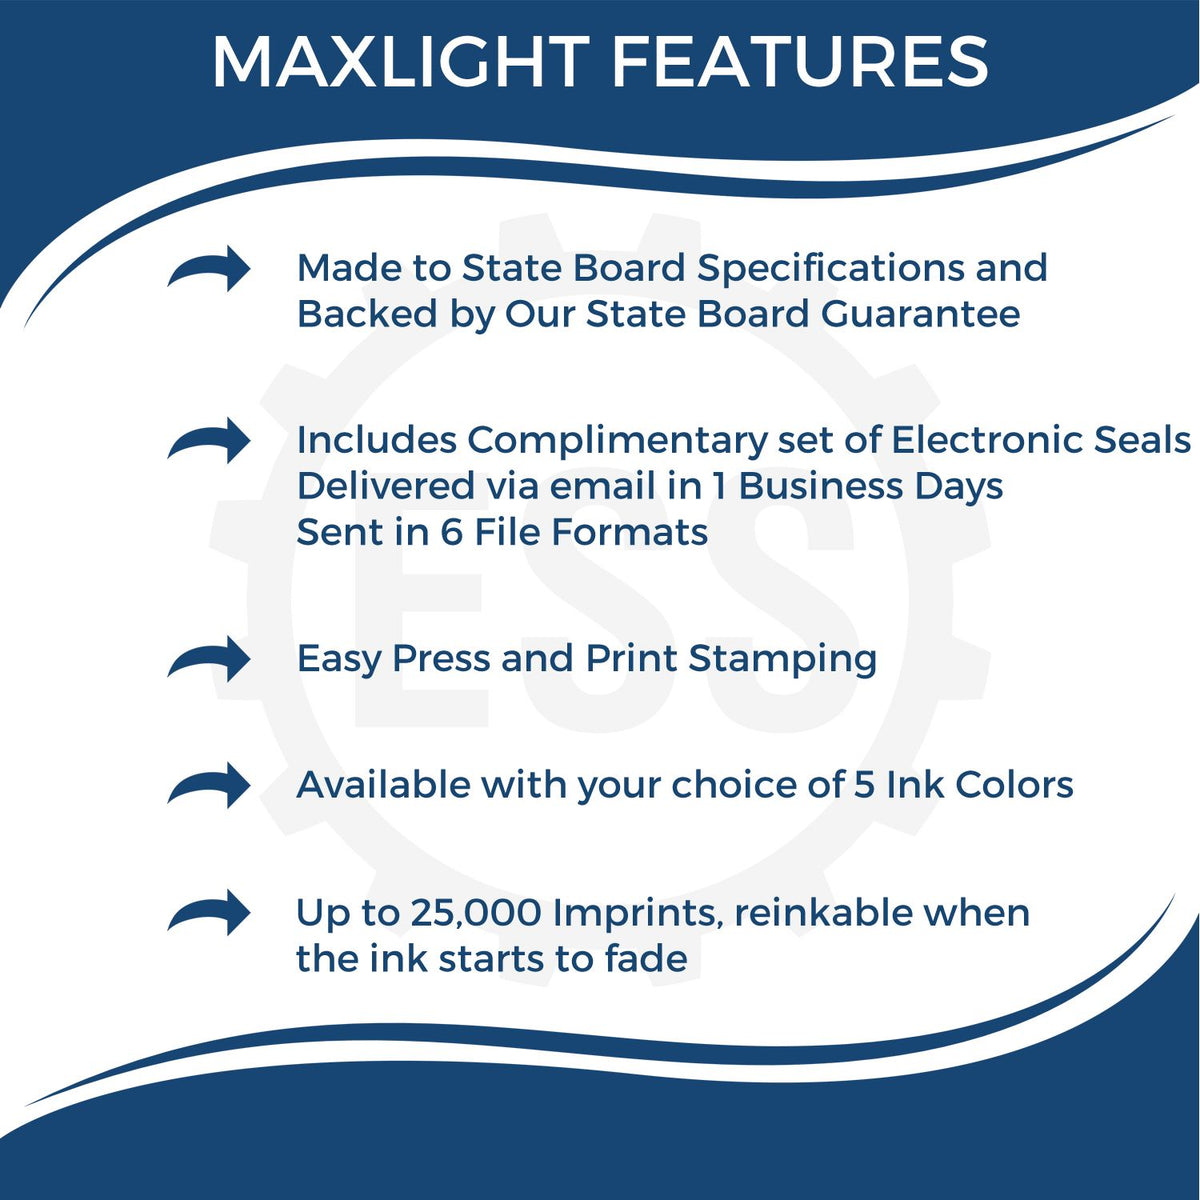 A picture of an infographic highlighting the selling points for the Premium MaxLight Pre-Inked District of Columbia Geology Stamp